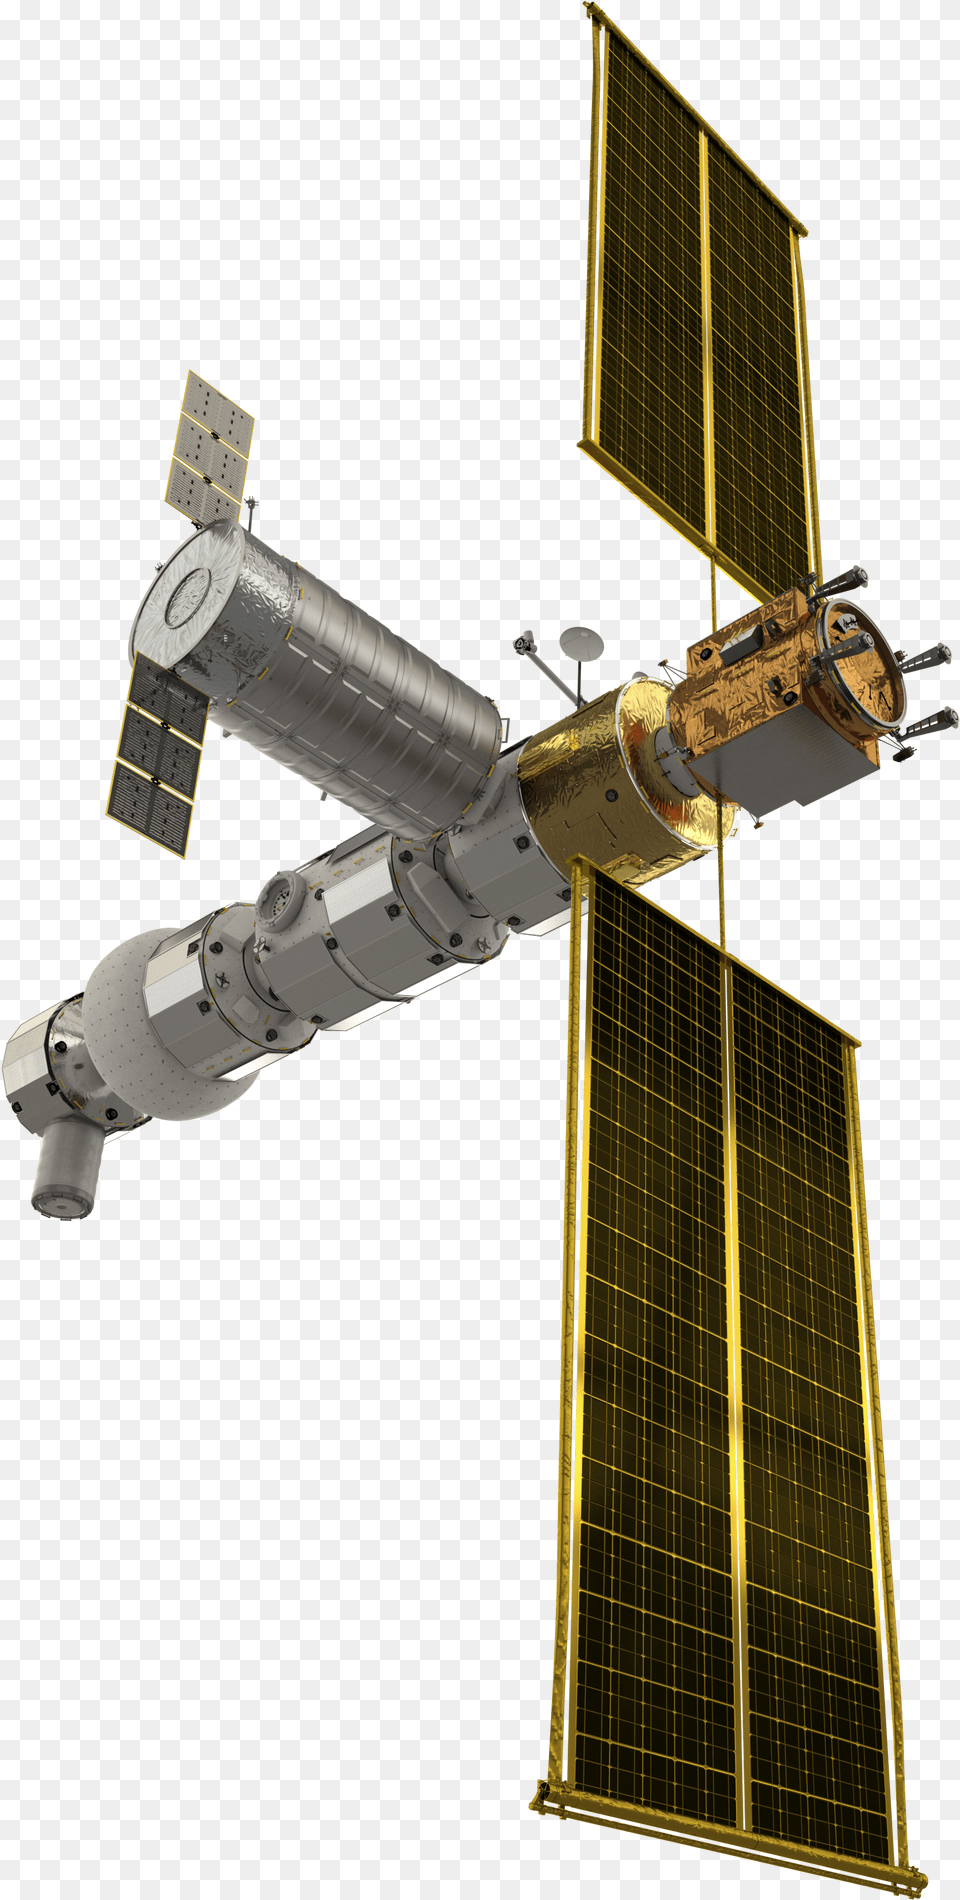 Esa Gateway Solar Arrays U2013 Transparent Background Satellite, Astronomy, Outer Space Png